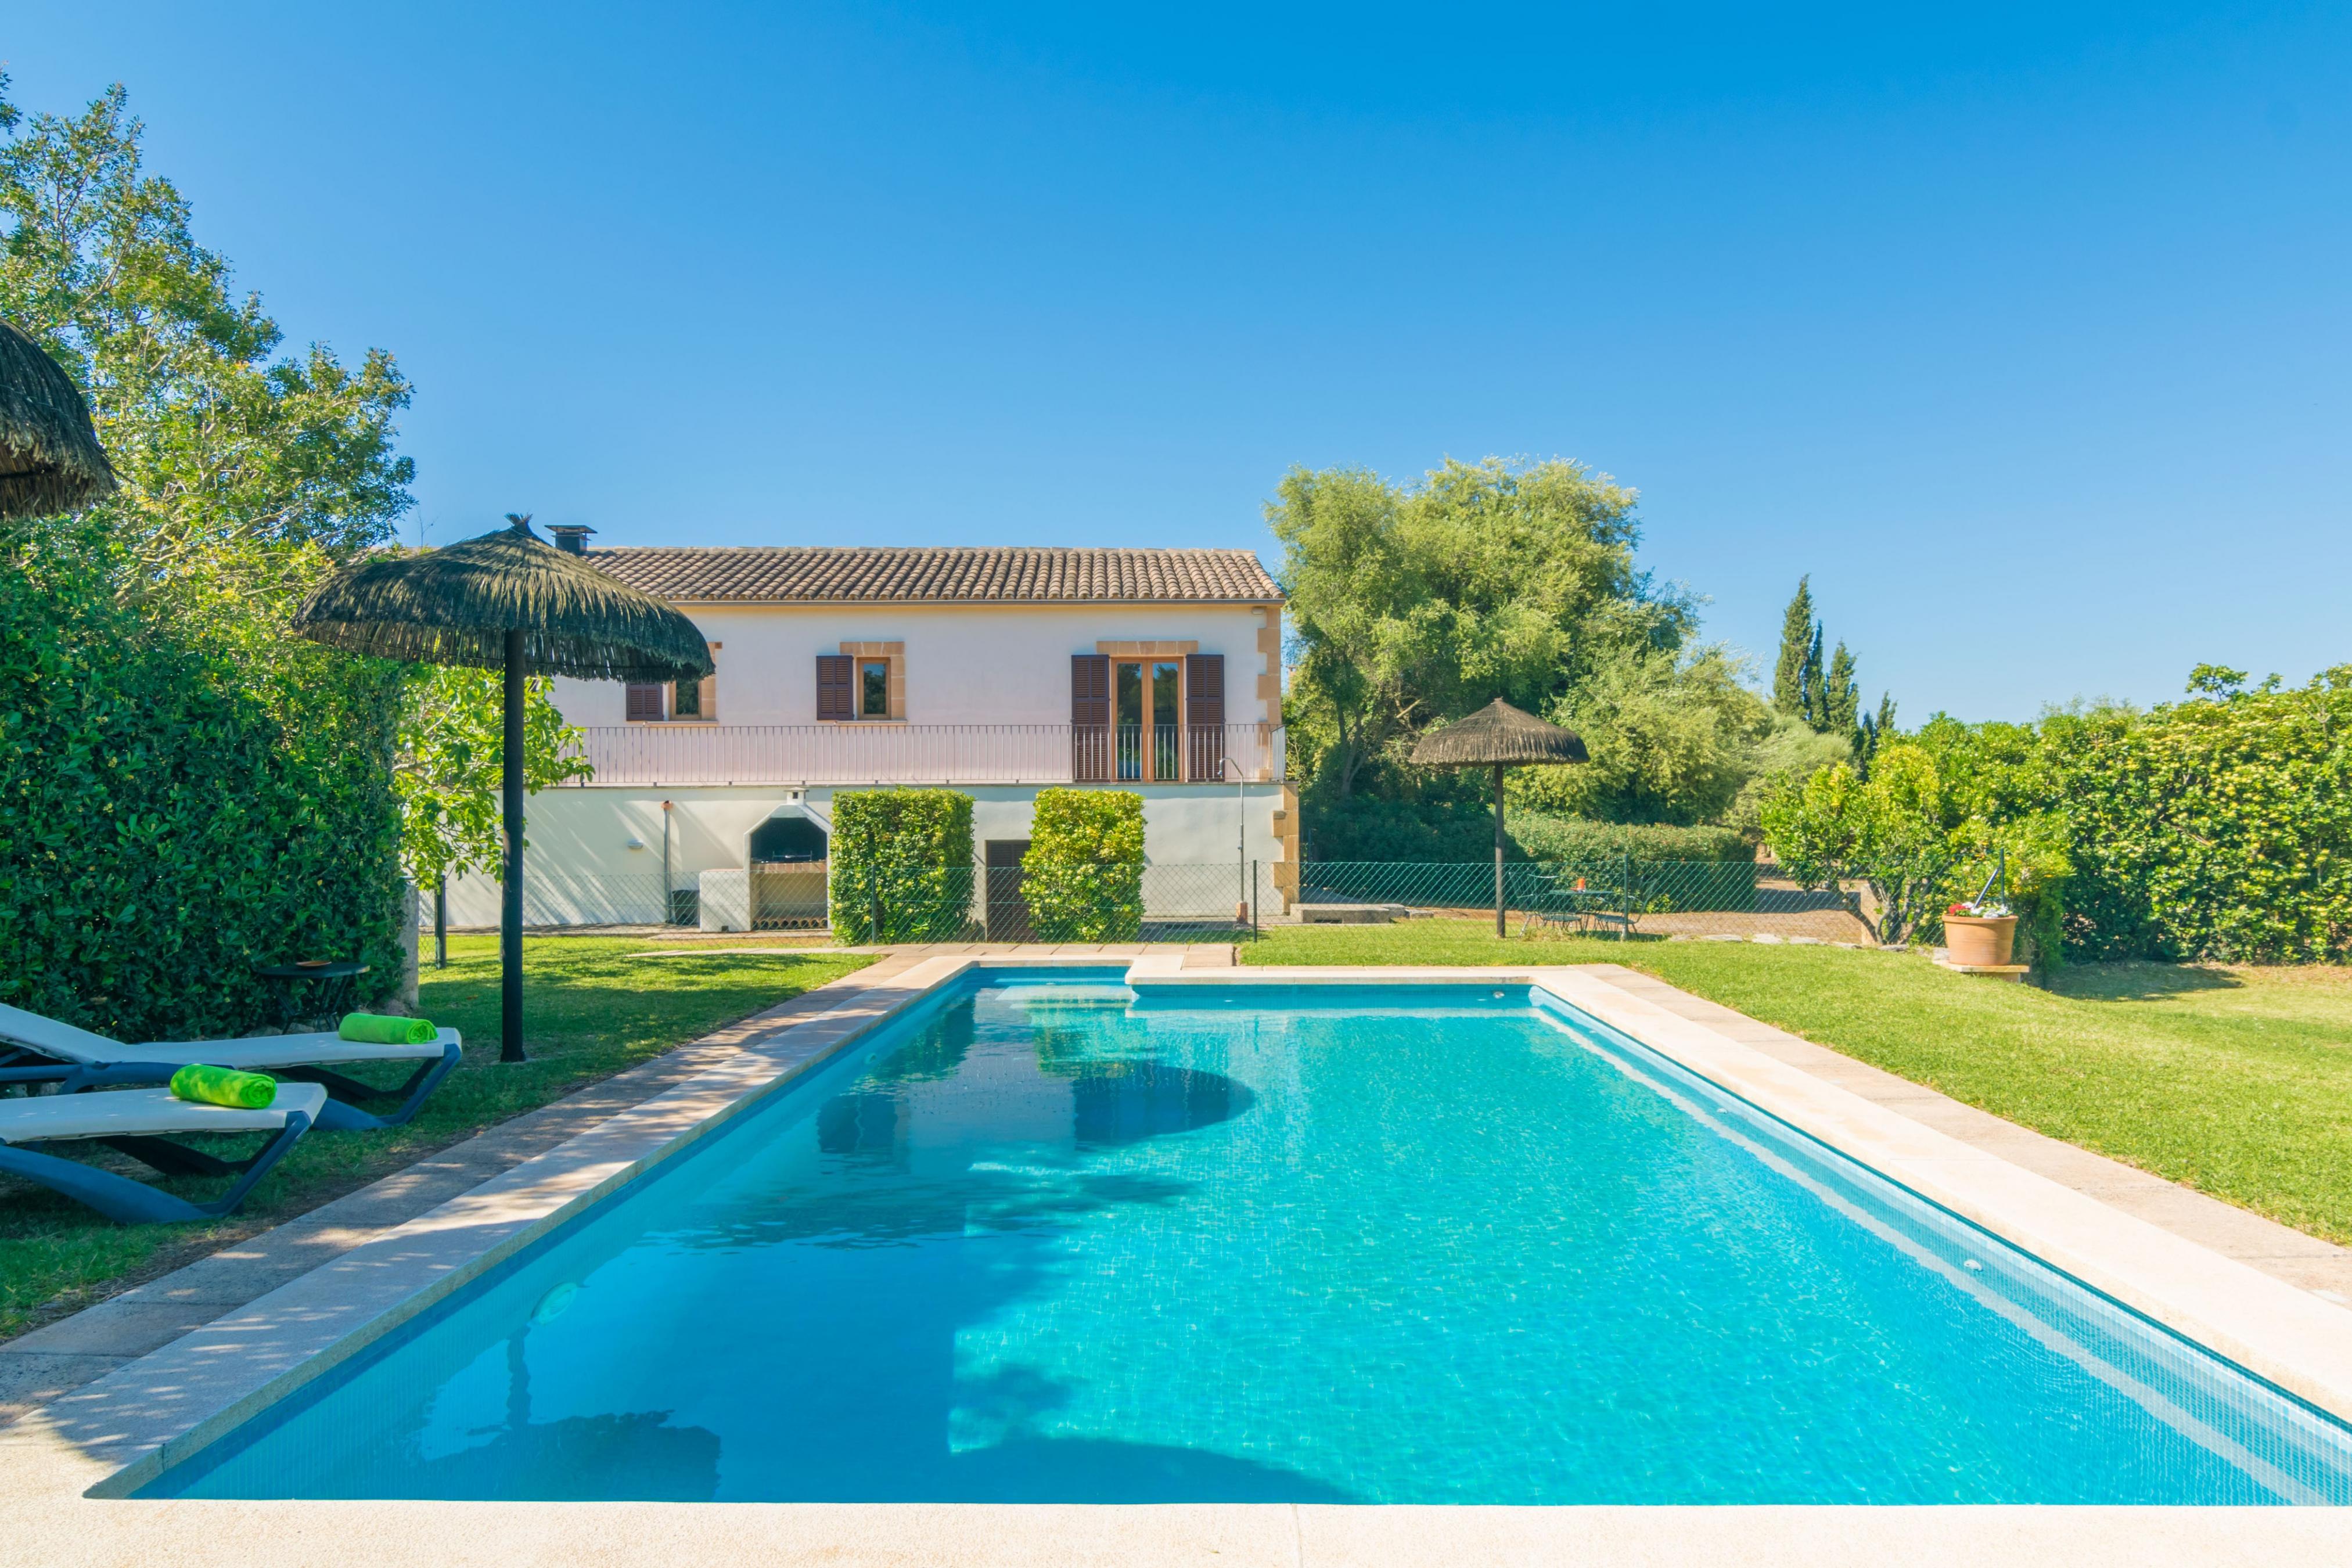 Property Image 1 - CAN MOSTATXET - Lovely country house with private pool 1.6 km from the beach. Free WiFi